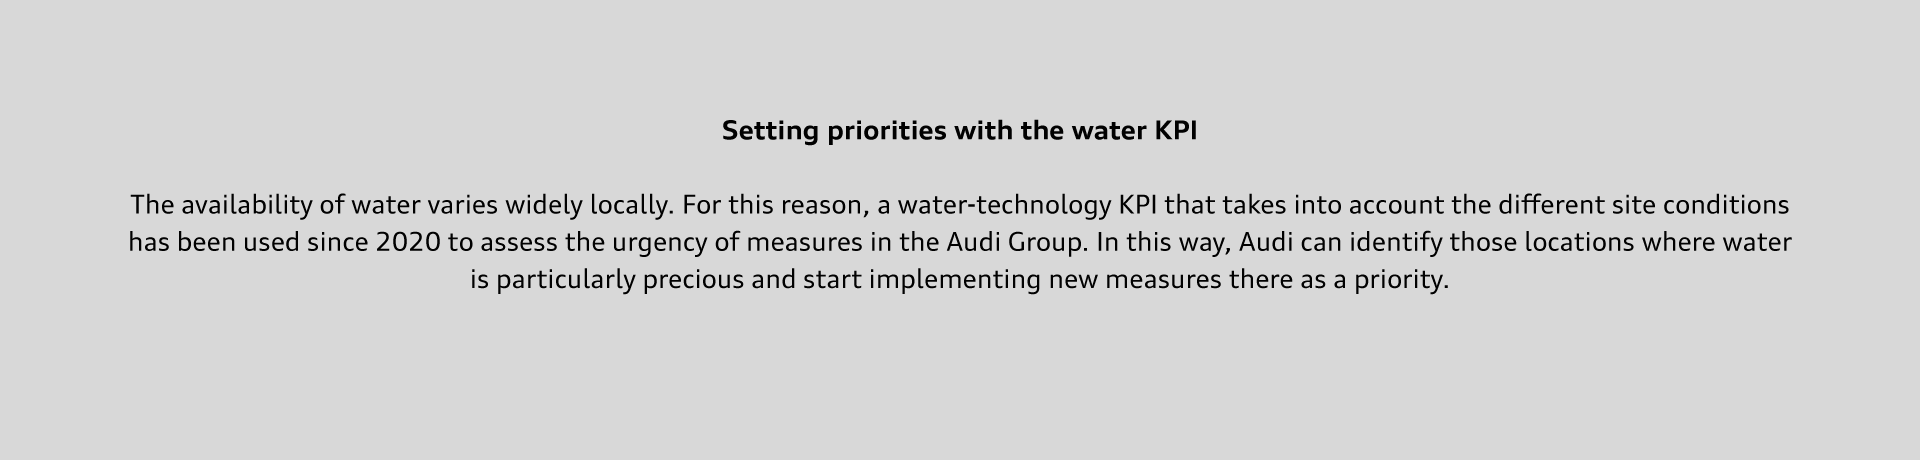 The availability of water varies widely locally. For this reason, a water-technology KPI that takes into account the different site conditions has been used since 2020 to assess the urgency of measures in the Audi Group. In this way, Audi can identify those locations where water is particularly precious and start implementing new measures there as a priority.